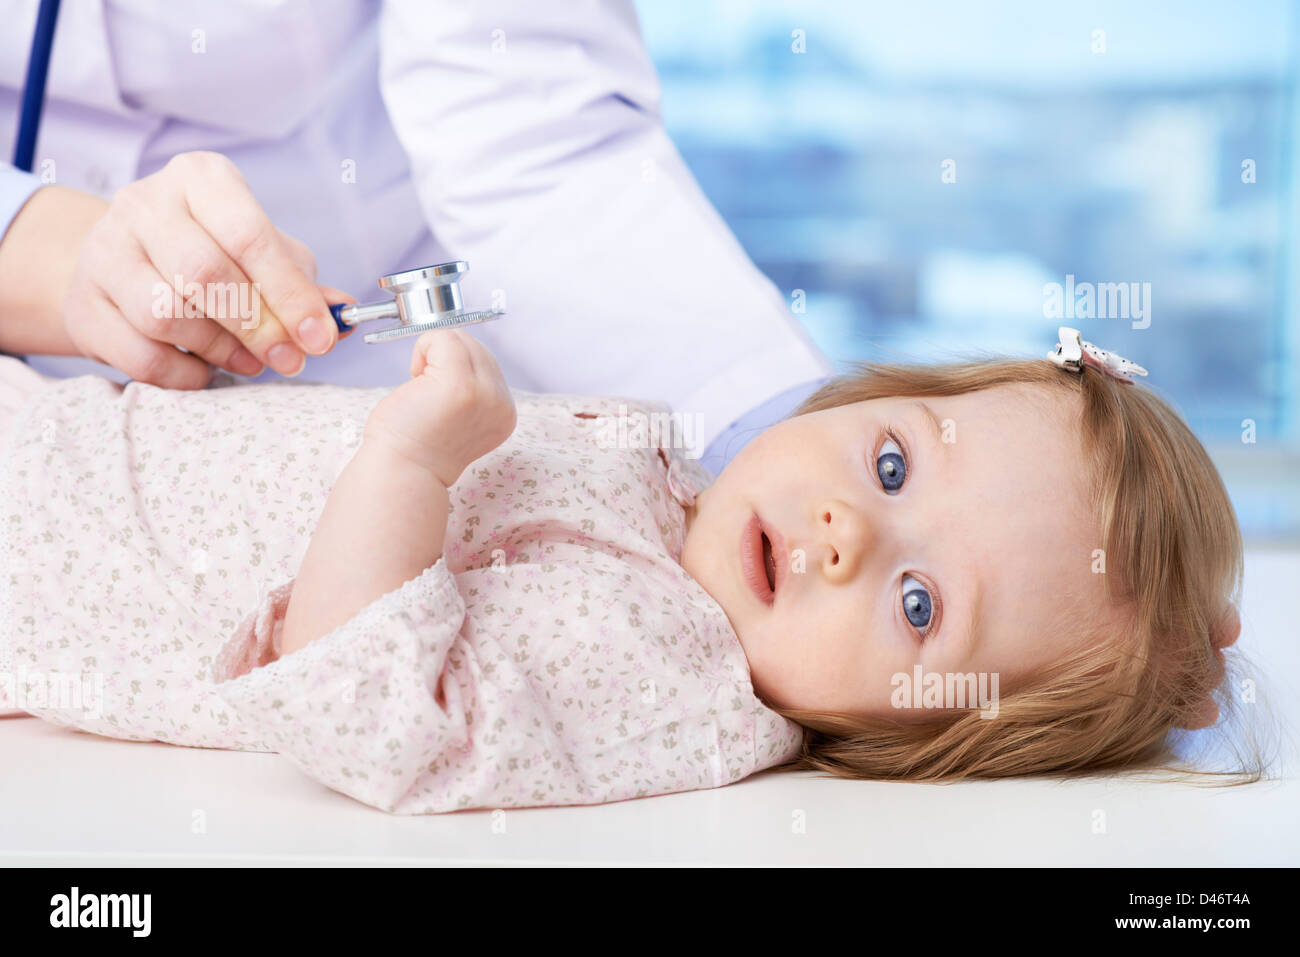 Cute baby being examined by pediatrician Stock Photo